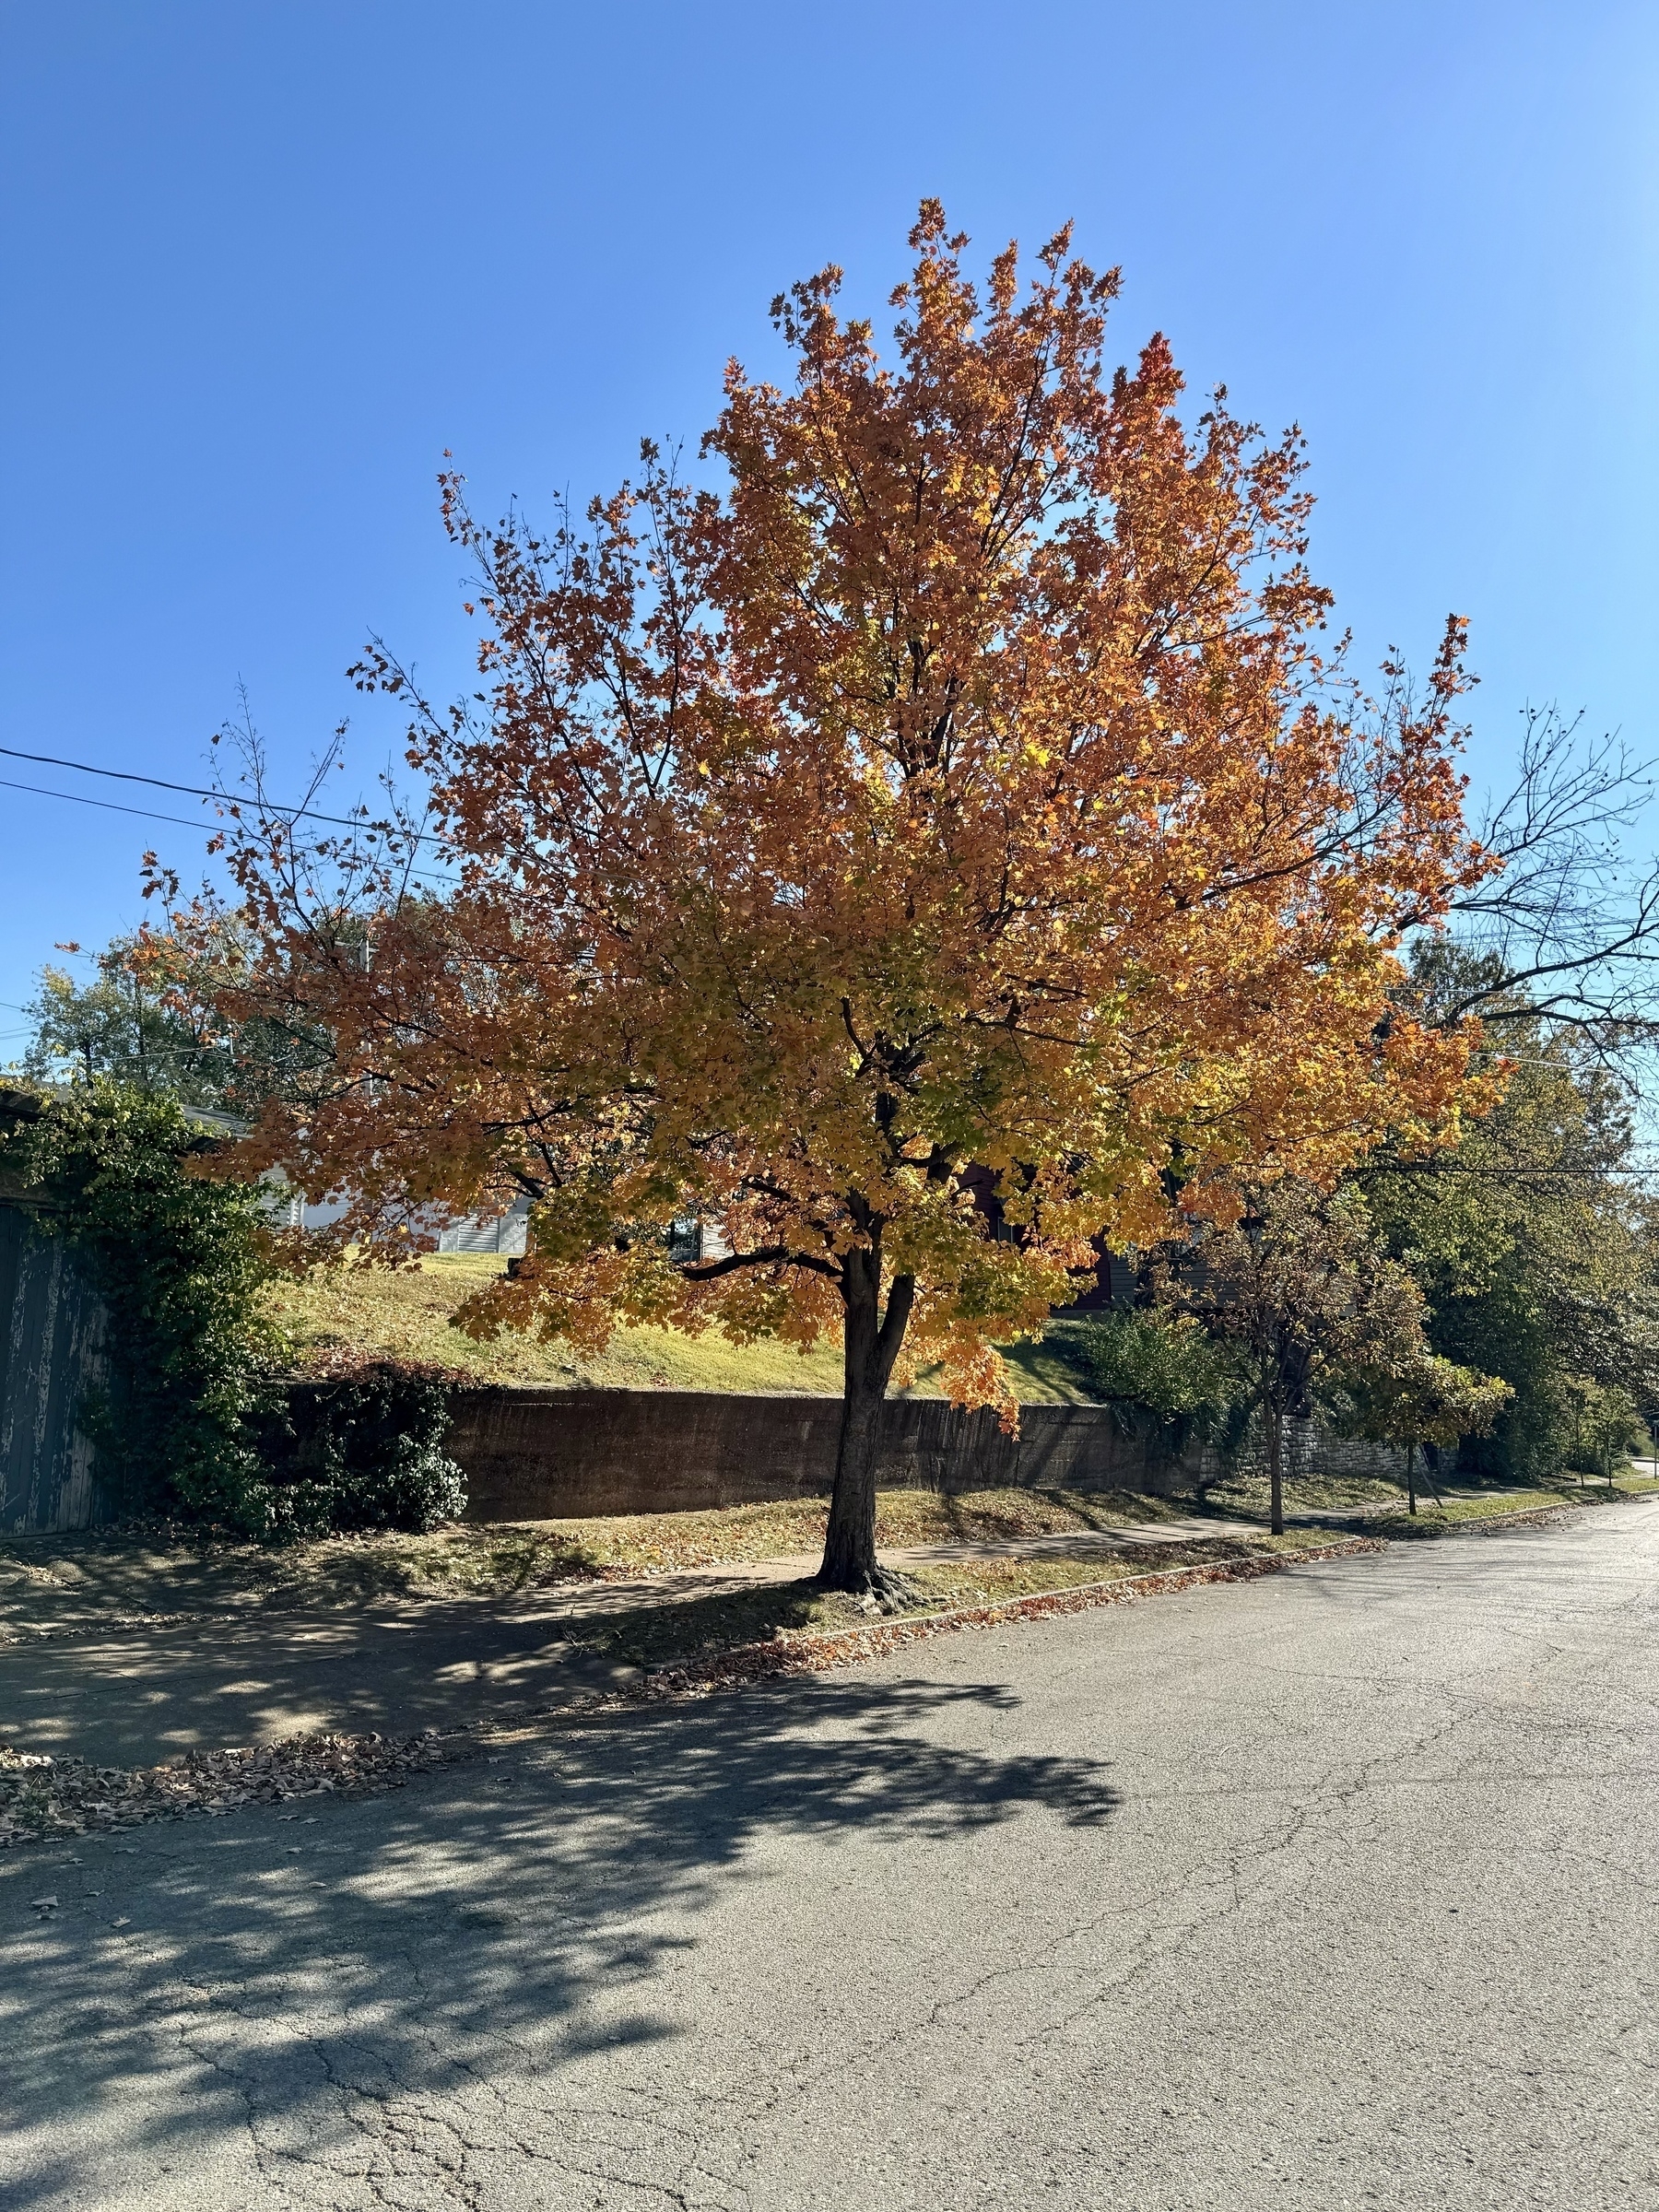 Tree with yellow and orange leaves, in front of an asphalt paved street.